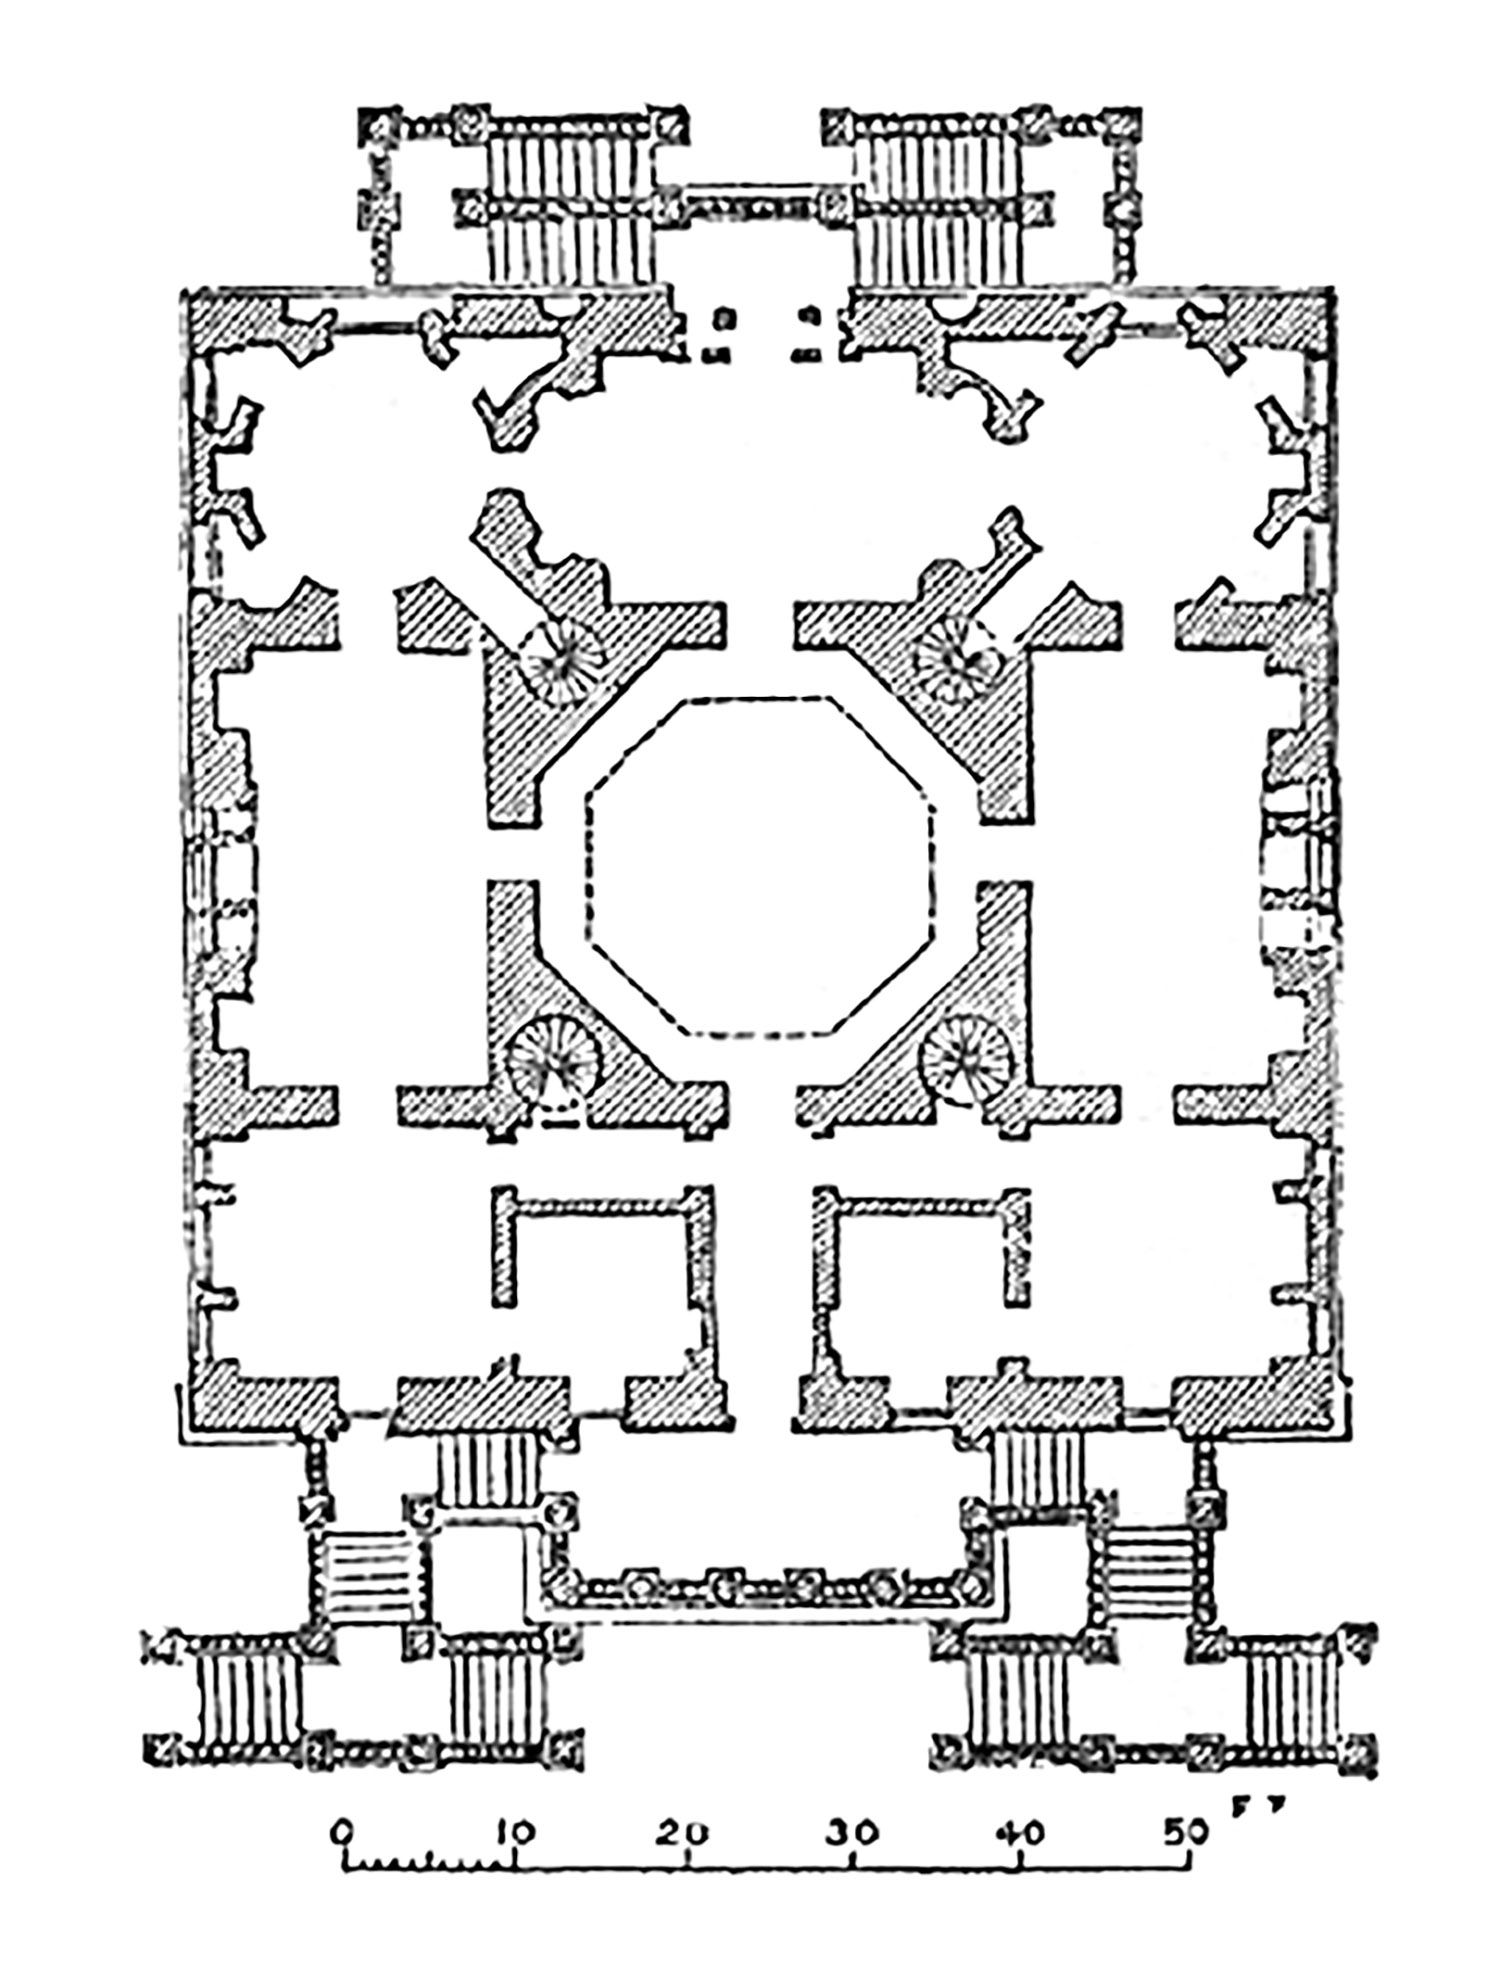 A black and white floor plan shows the view of the large estate from above.